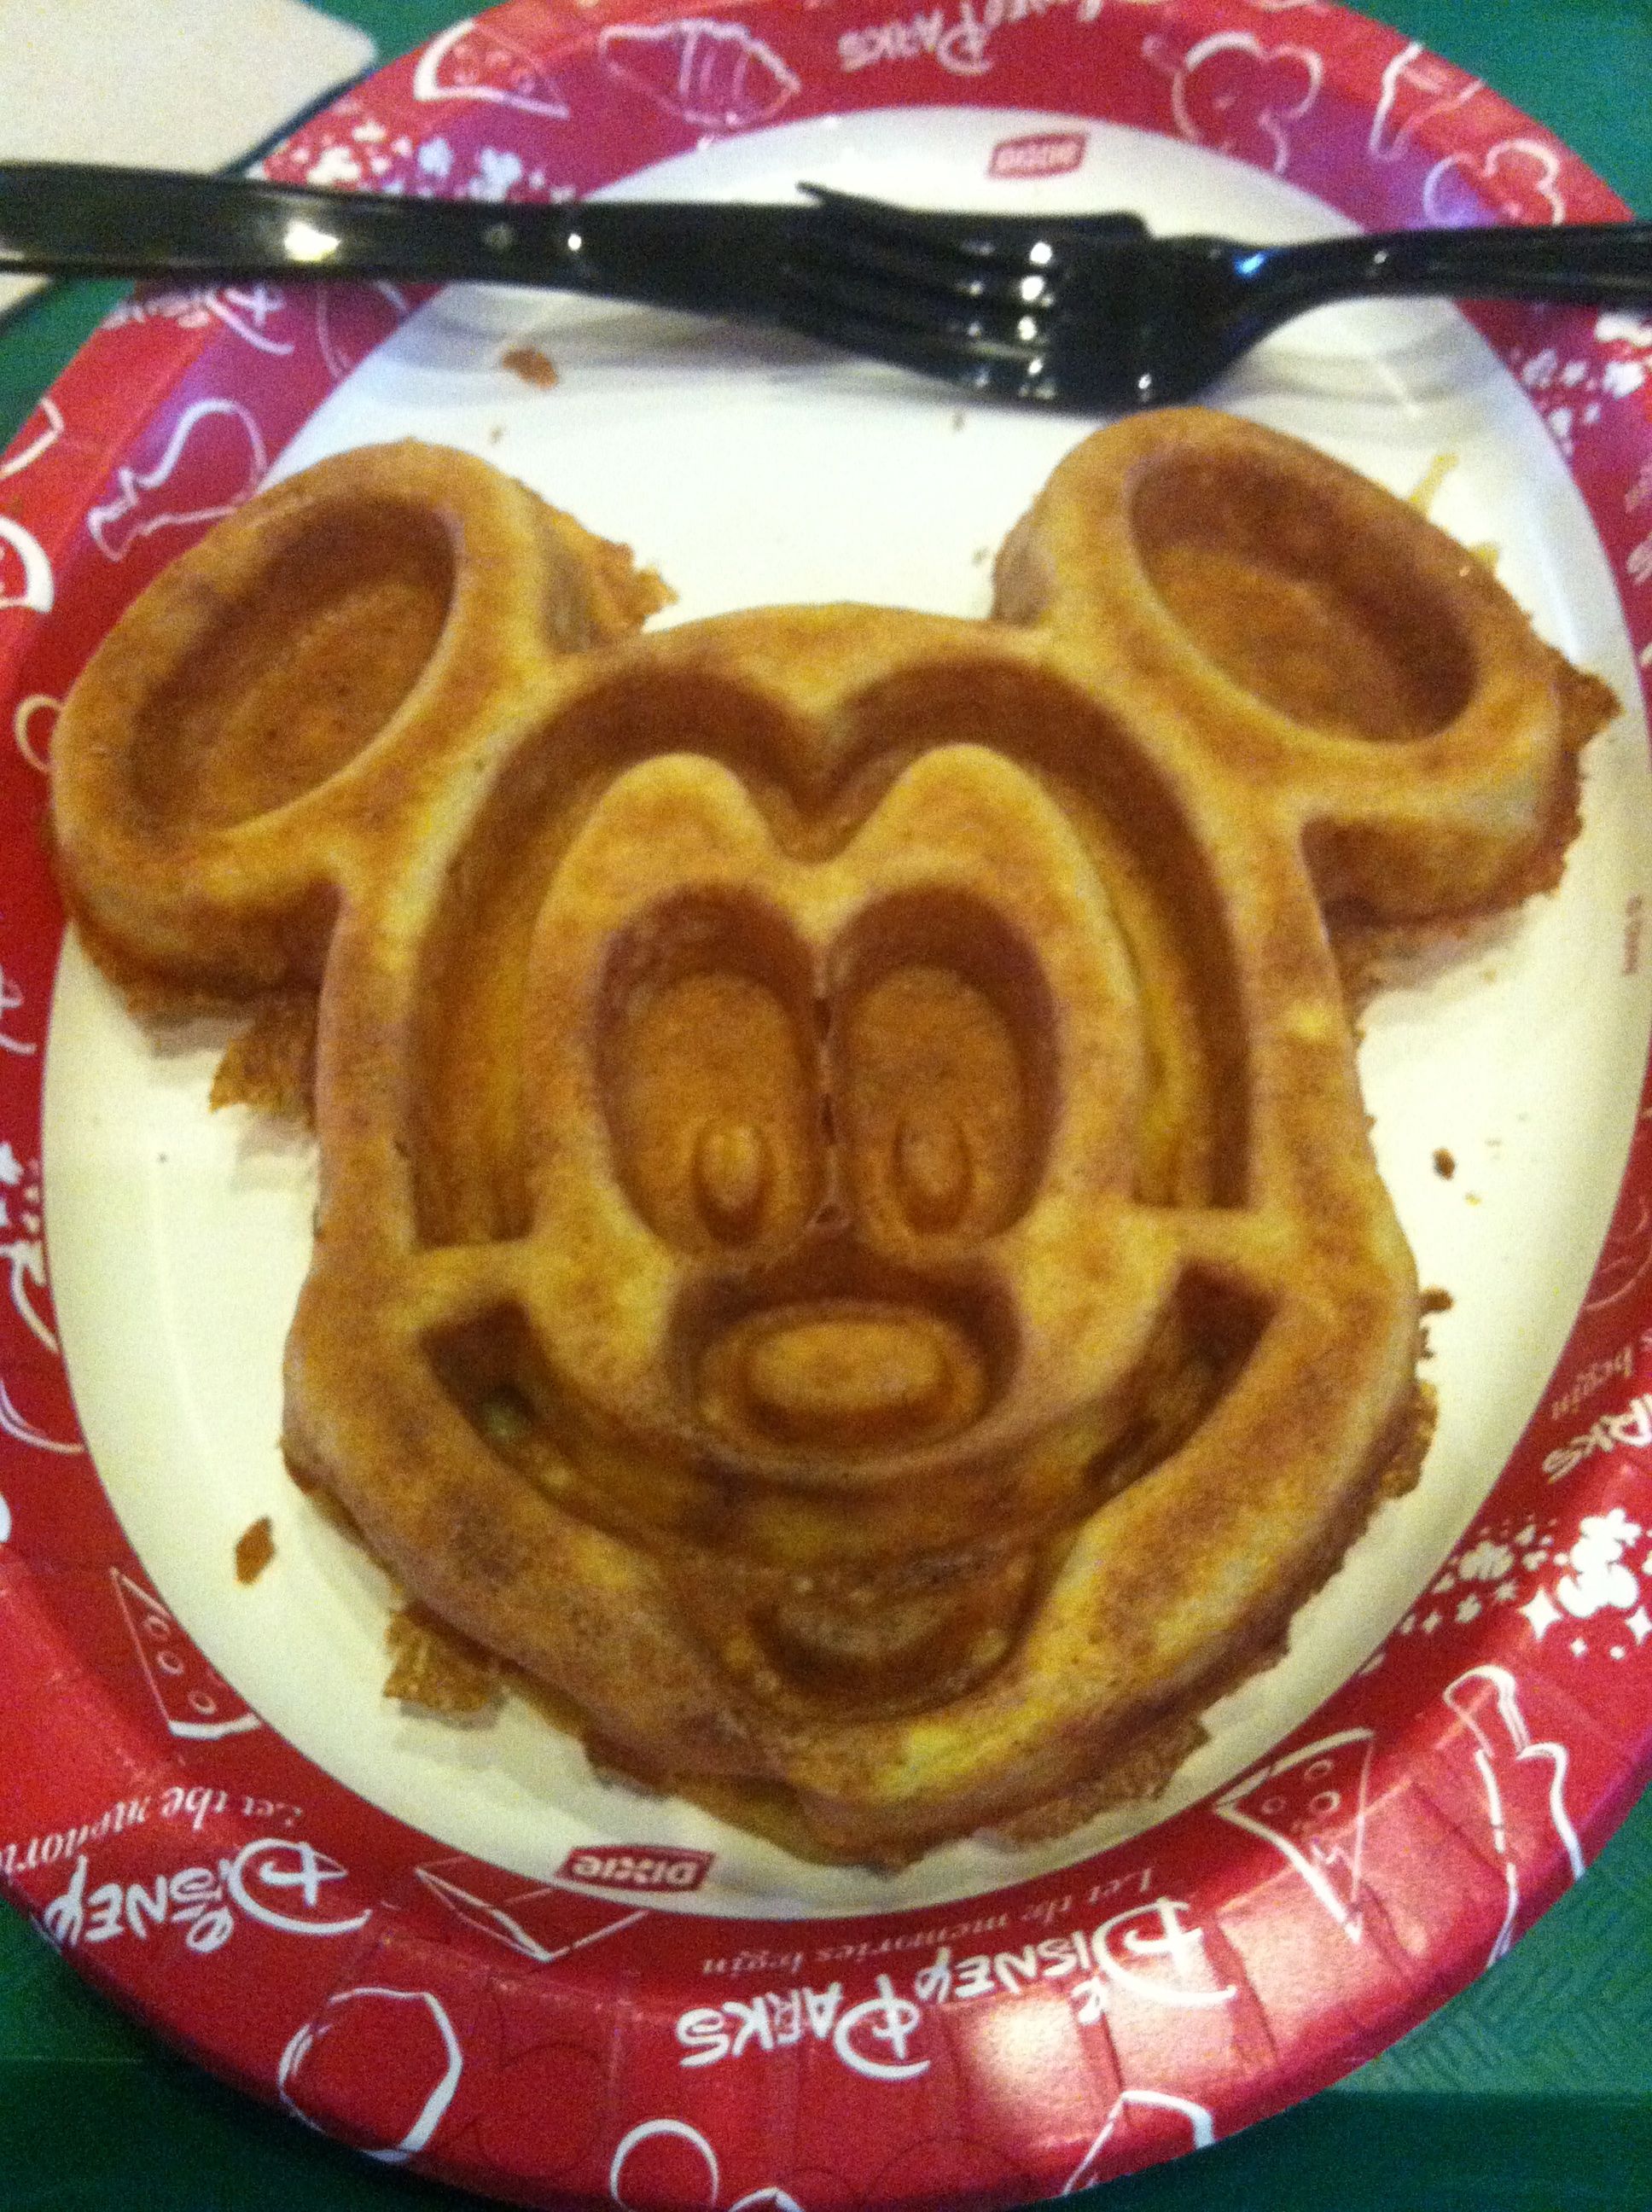 Mickey mouse shaped waffle served in the hotel food court at Walt Disney World